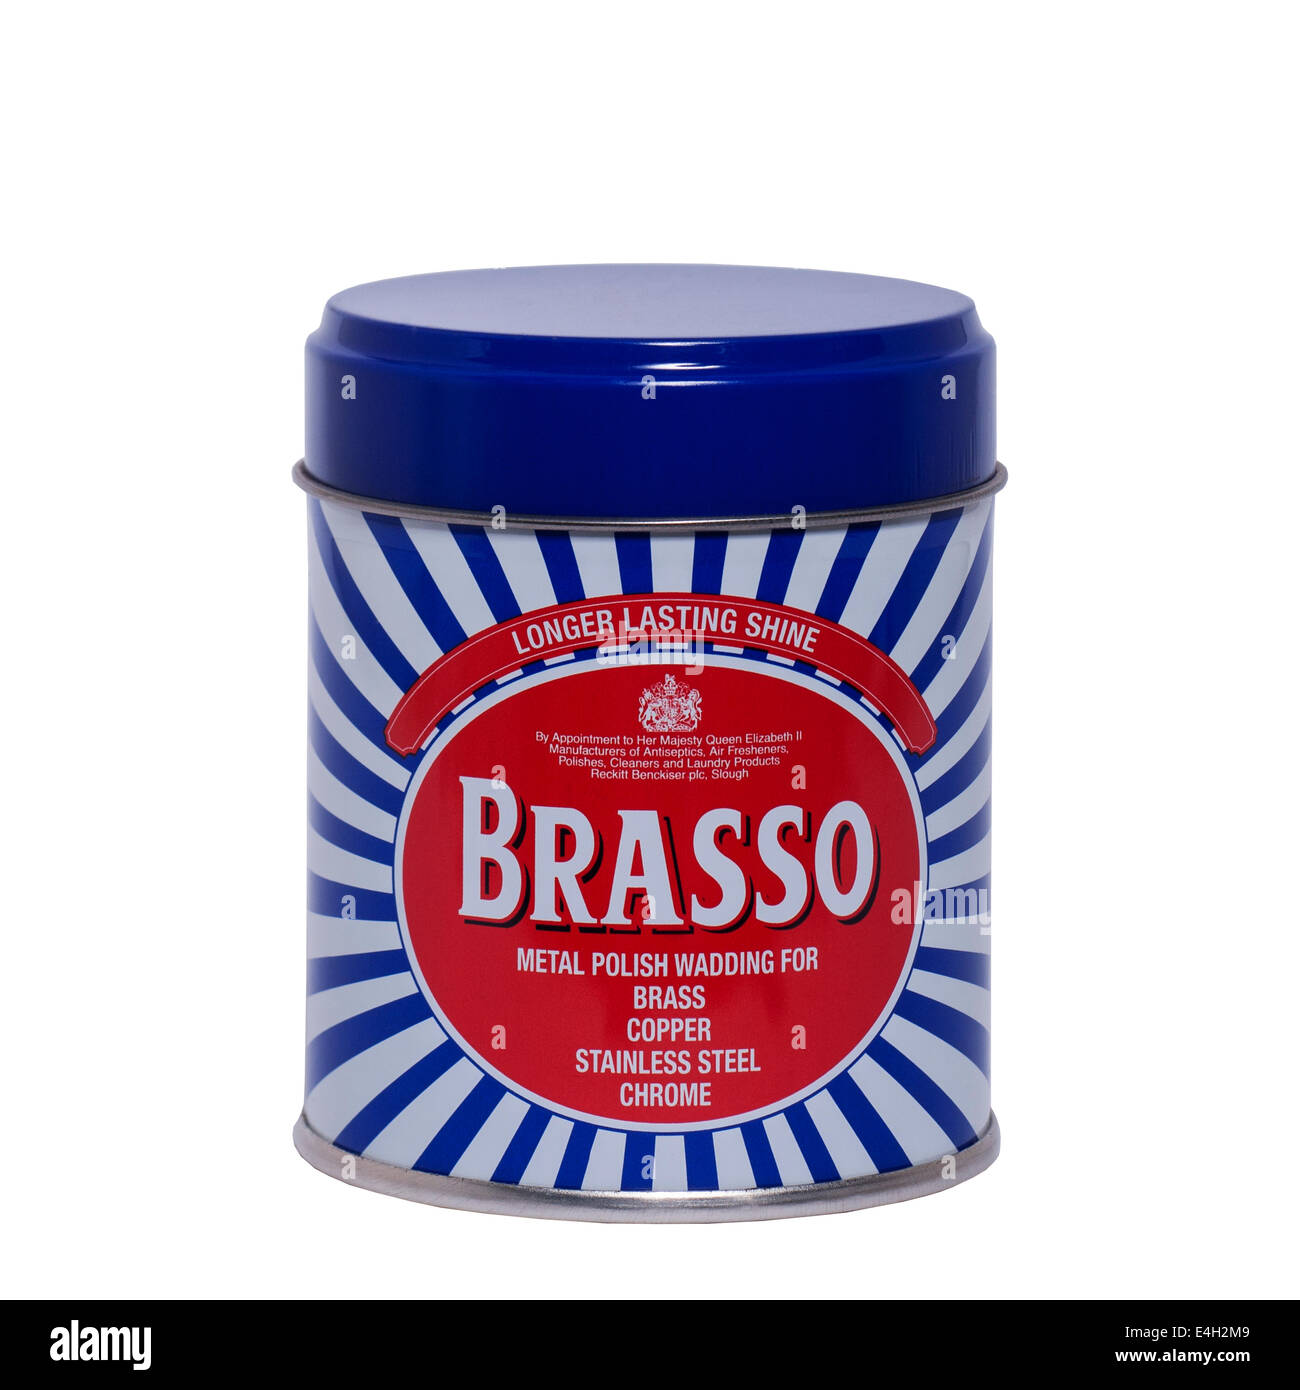 A tin of Brasso metal polish wadding for brass , copper , stainless steel and chrome on a white background Stock Photo